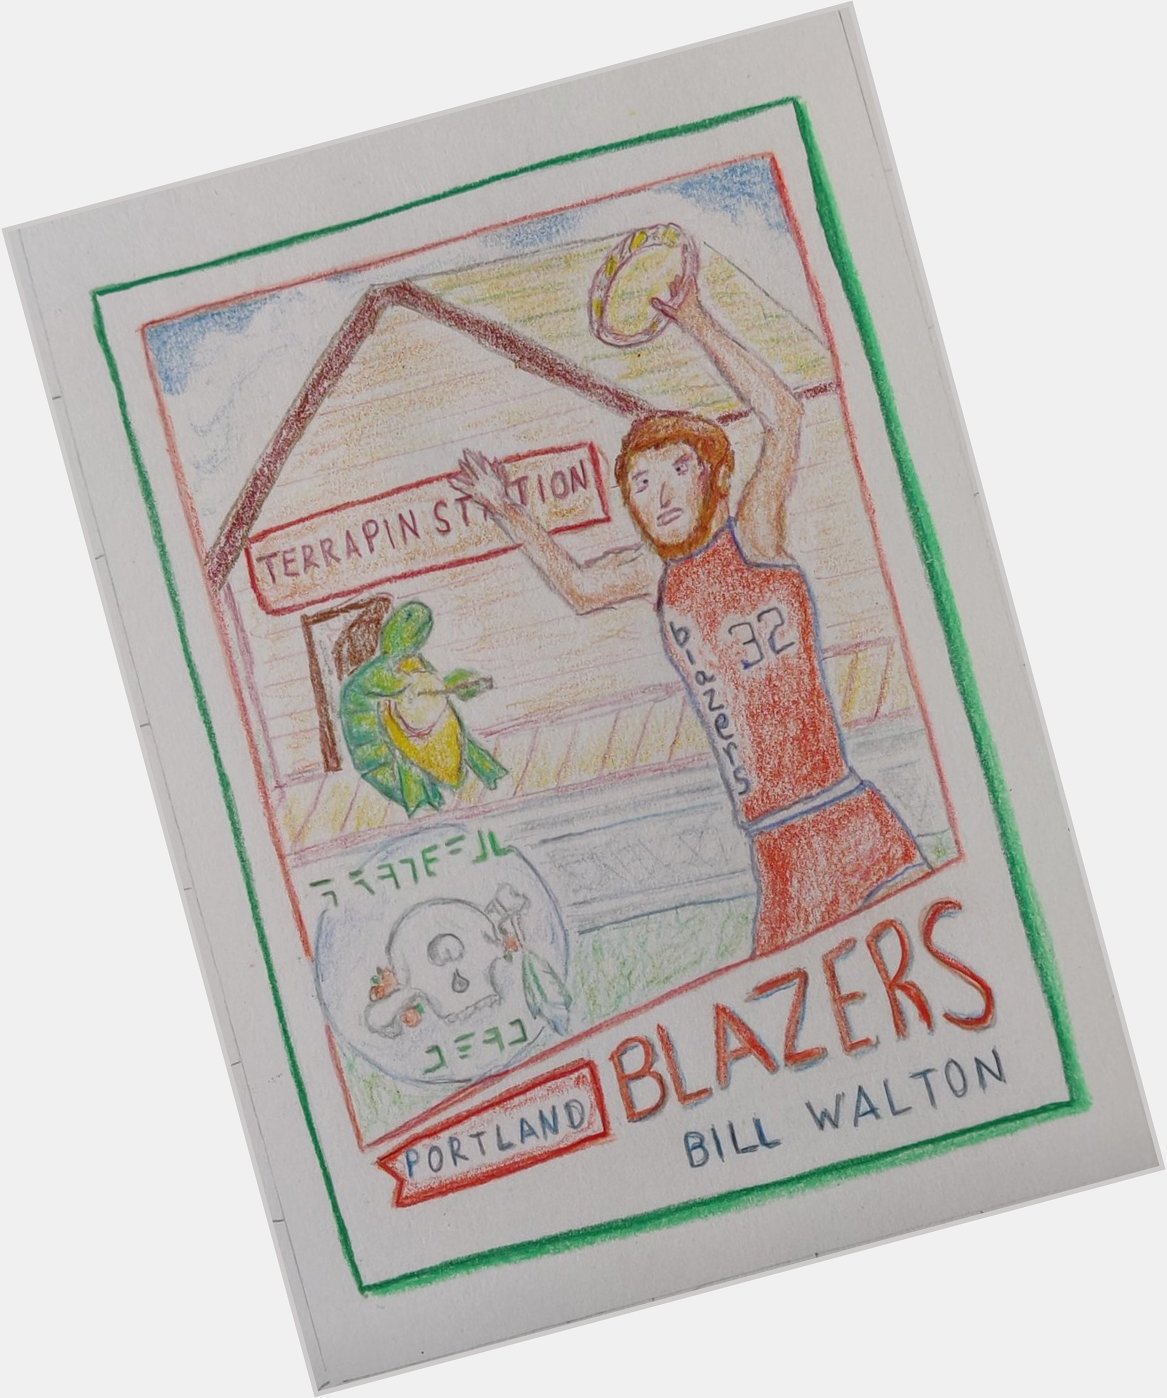 Happy 68th Birthday Bill Walton (h/t for the reminder) 1977T Terrapin Station variation. 